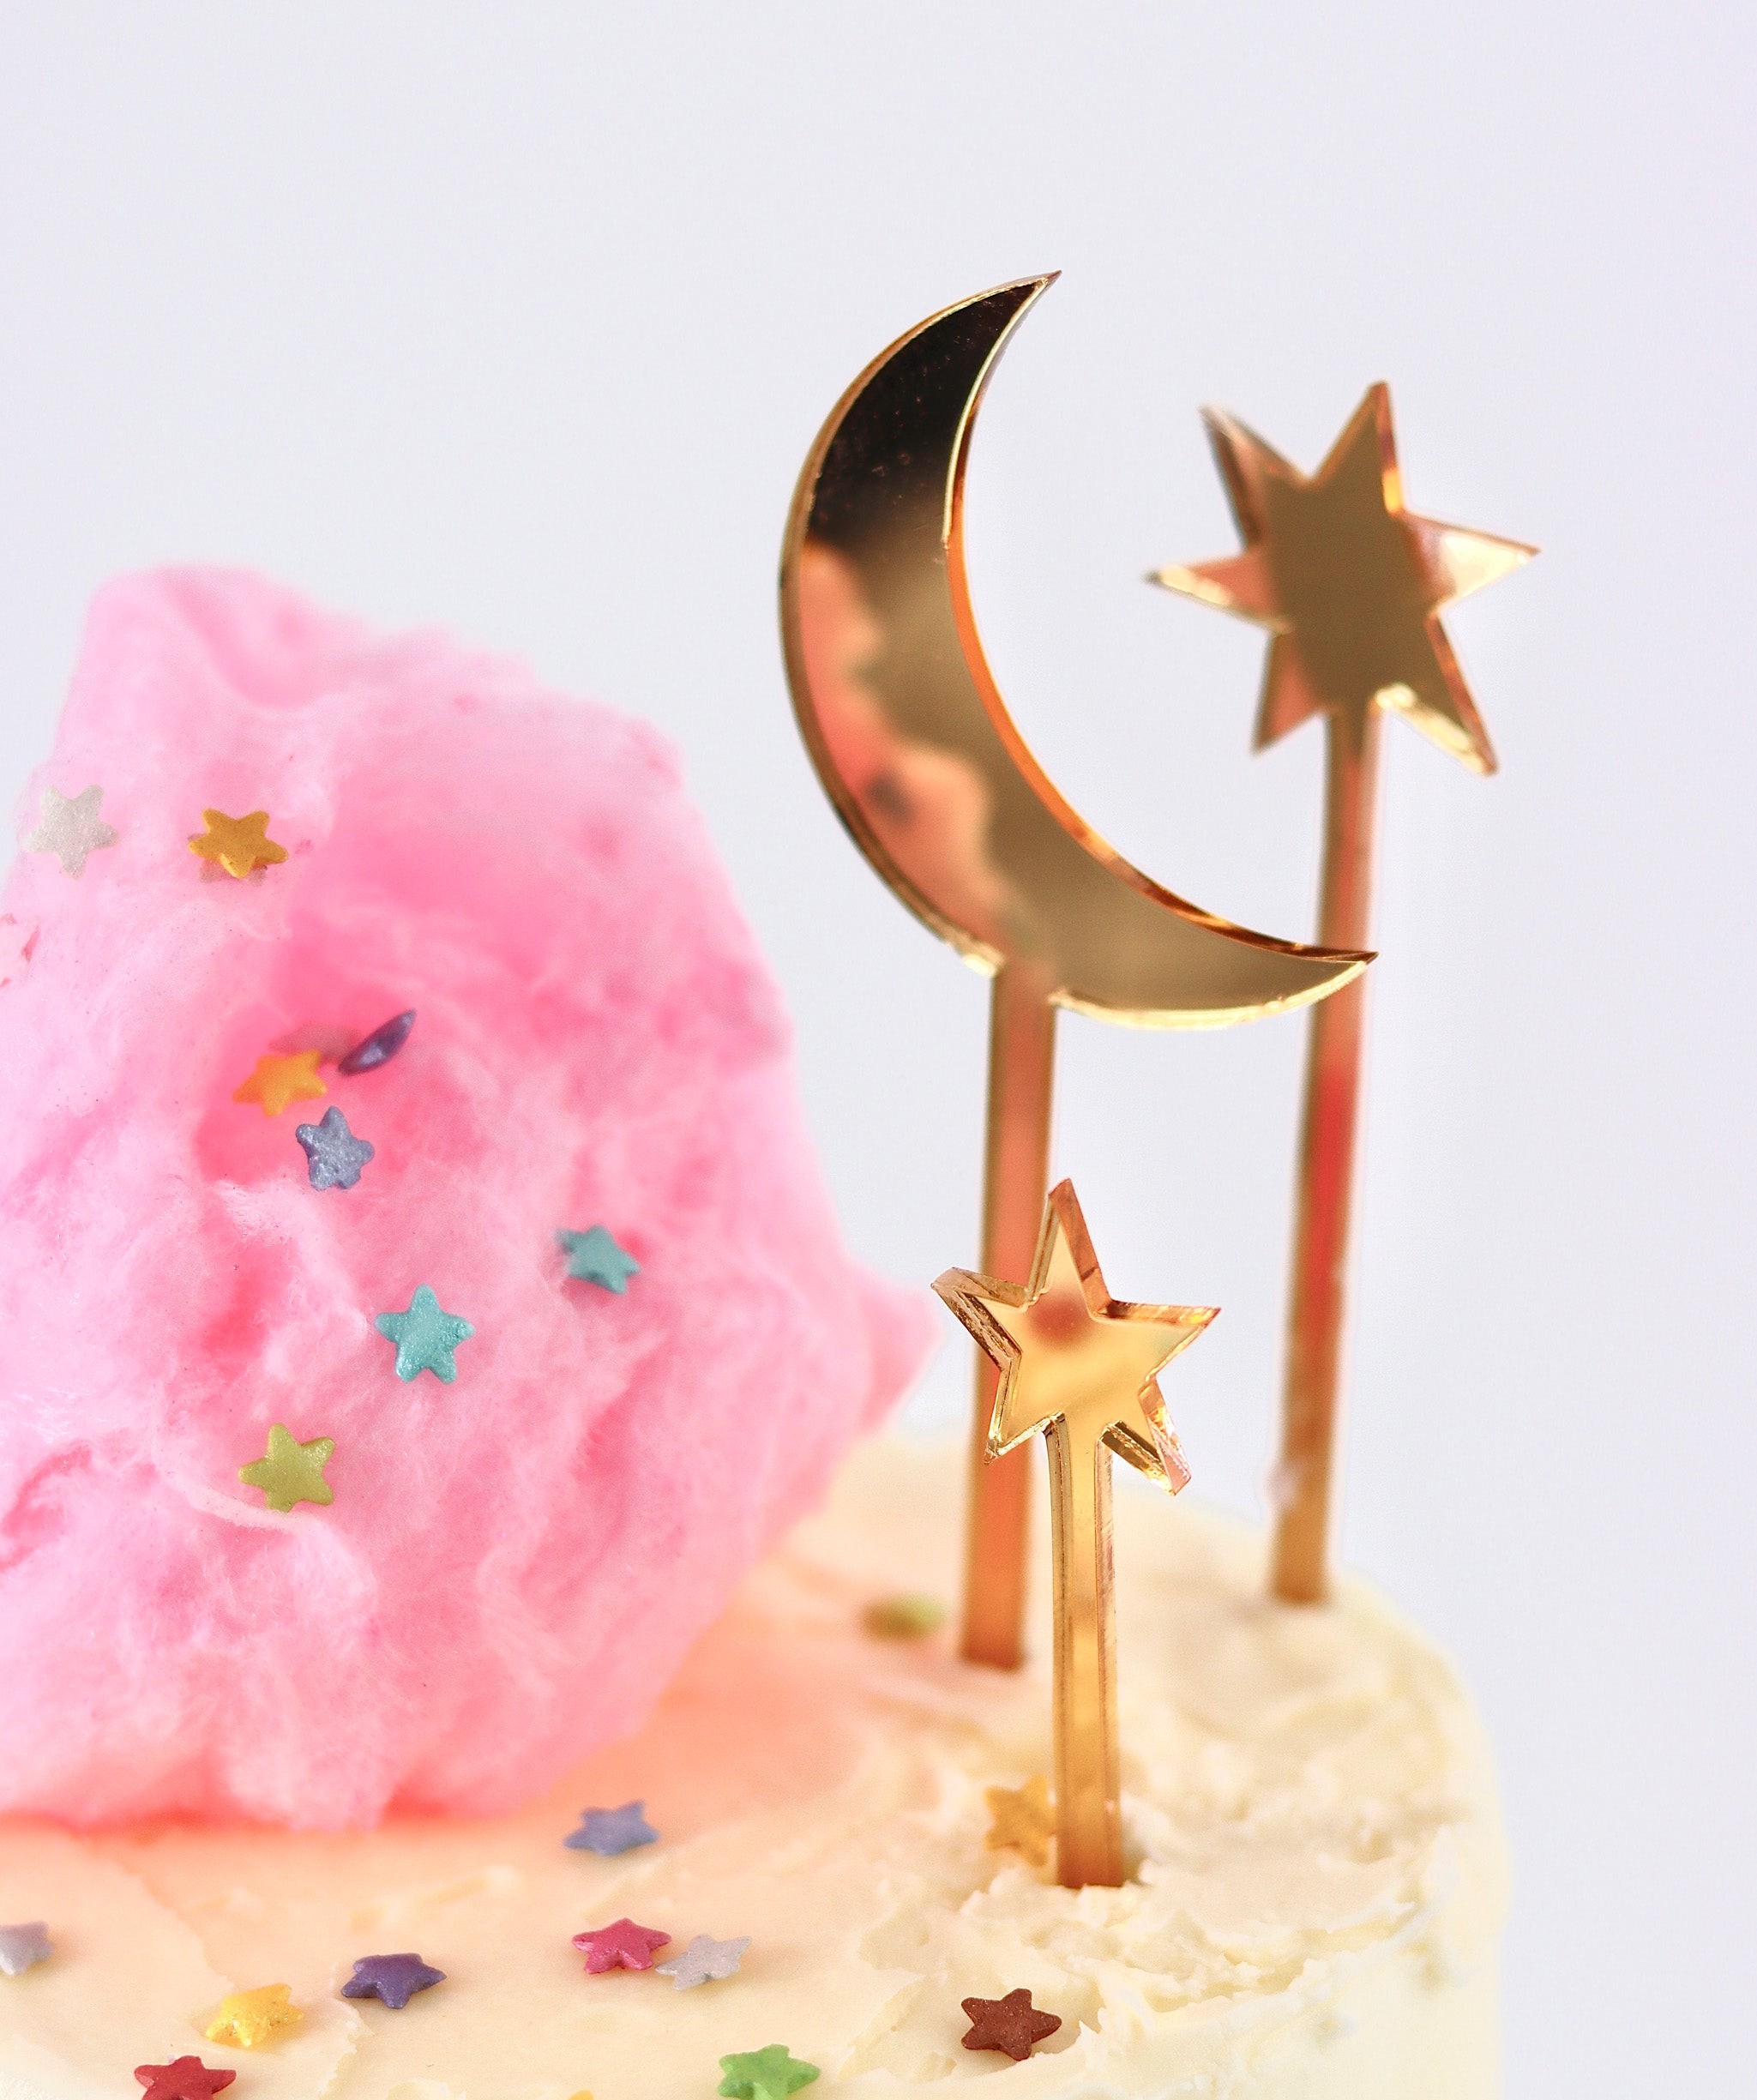 Moon and stars cake toppers - set of 3